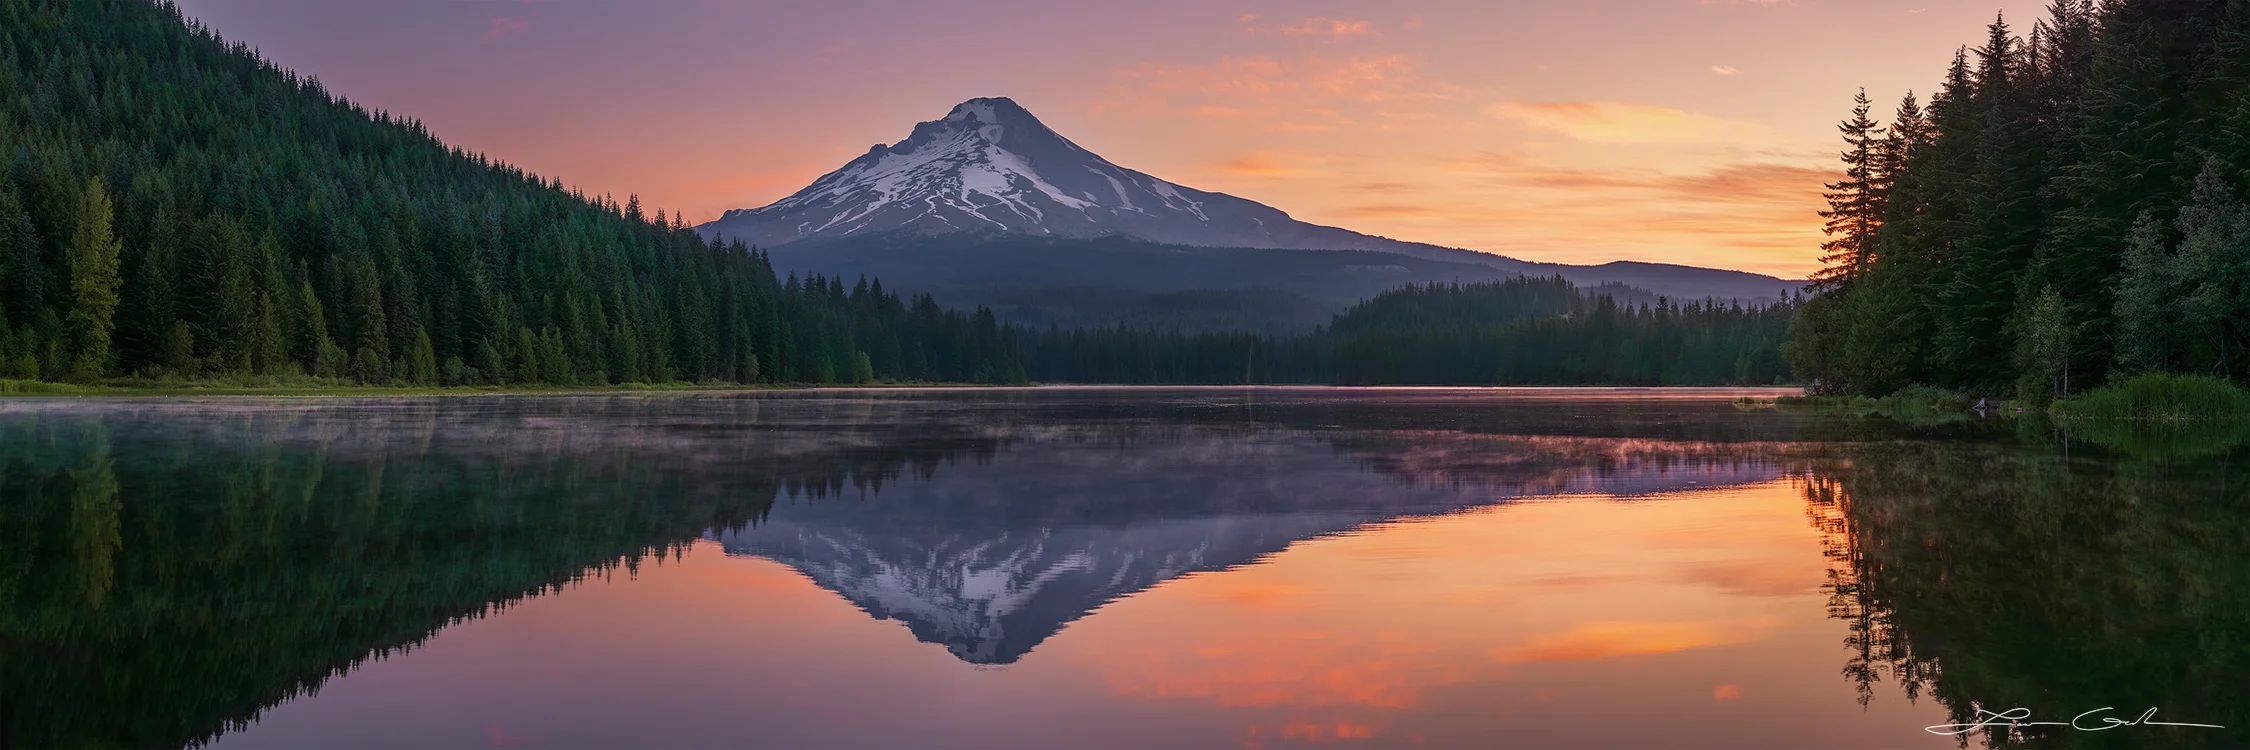 A majestic Oregon mountain sunrise reflected in a still lake. A colorful sunset paints the sky and reflects on the calm water of a lake, with a silhouette of a mountain in the distance. It is Mount Hood, a snow-capped peak, is reflected in the still waters of Trillium Lake at dusk. - Gintchin Fine Art